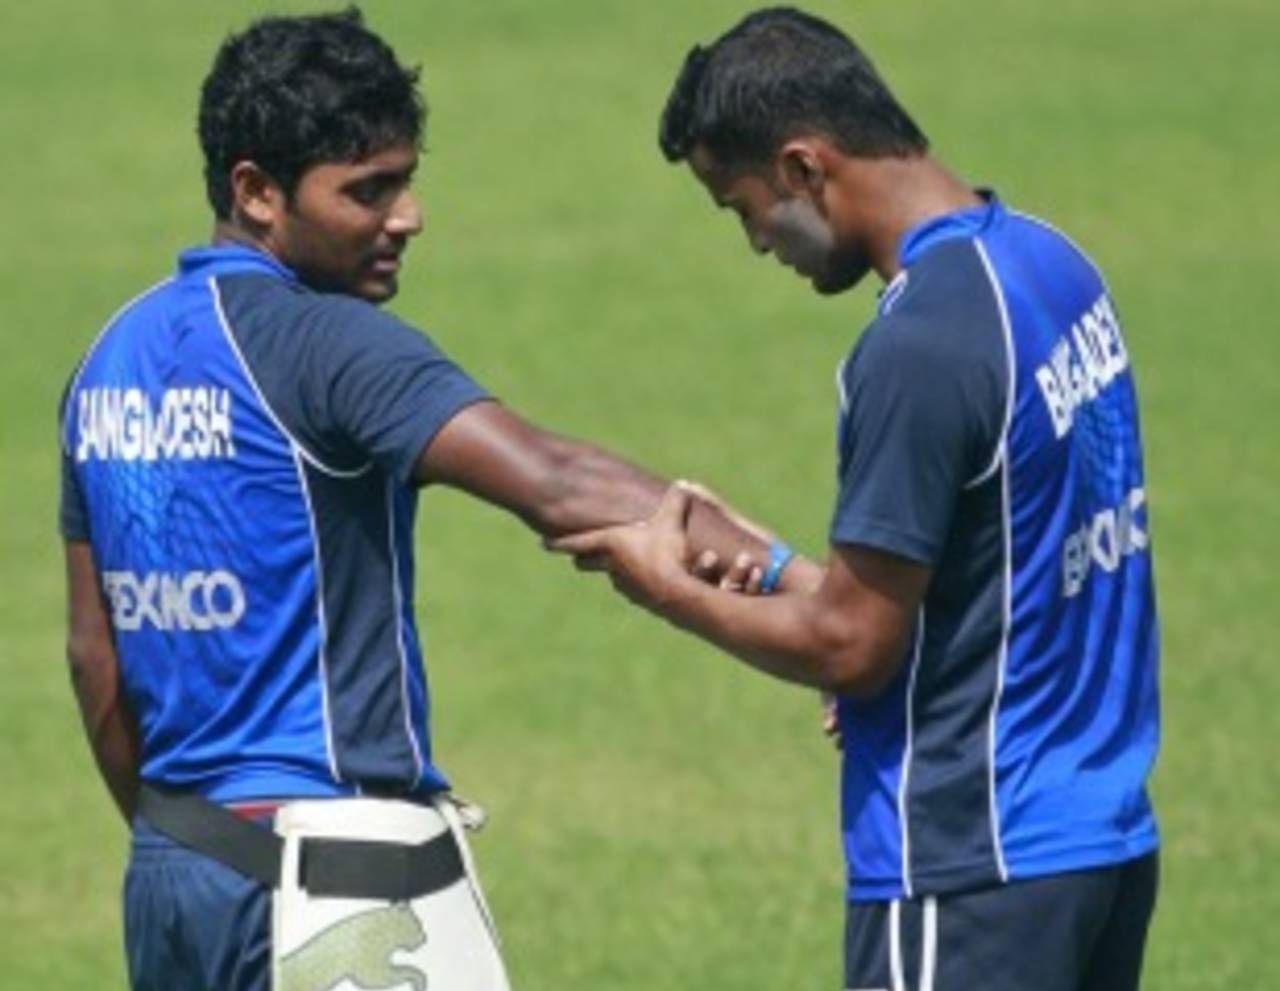 Imrul Kayes was hit on his right arm during a practice session, Shere Bangla Stadium, Mirpur, February 23, 2011